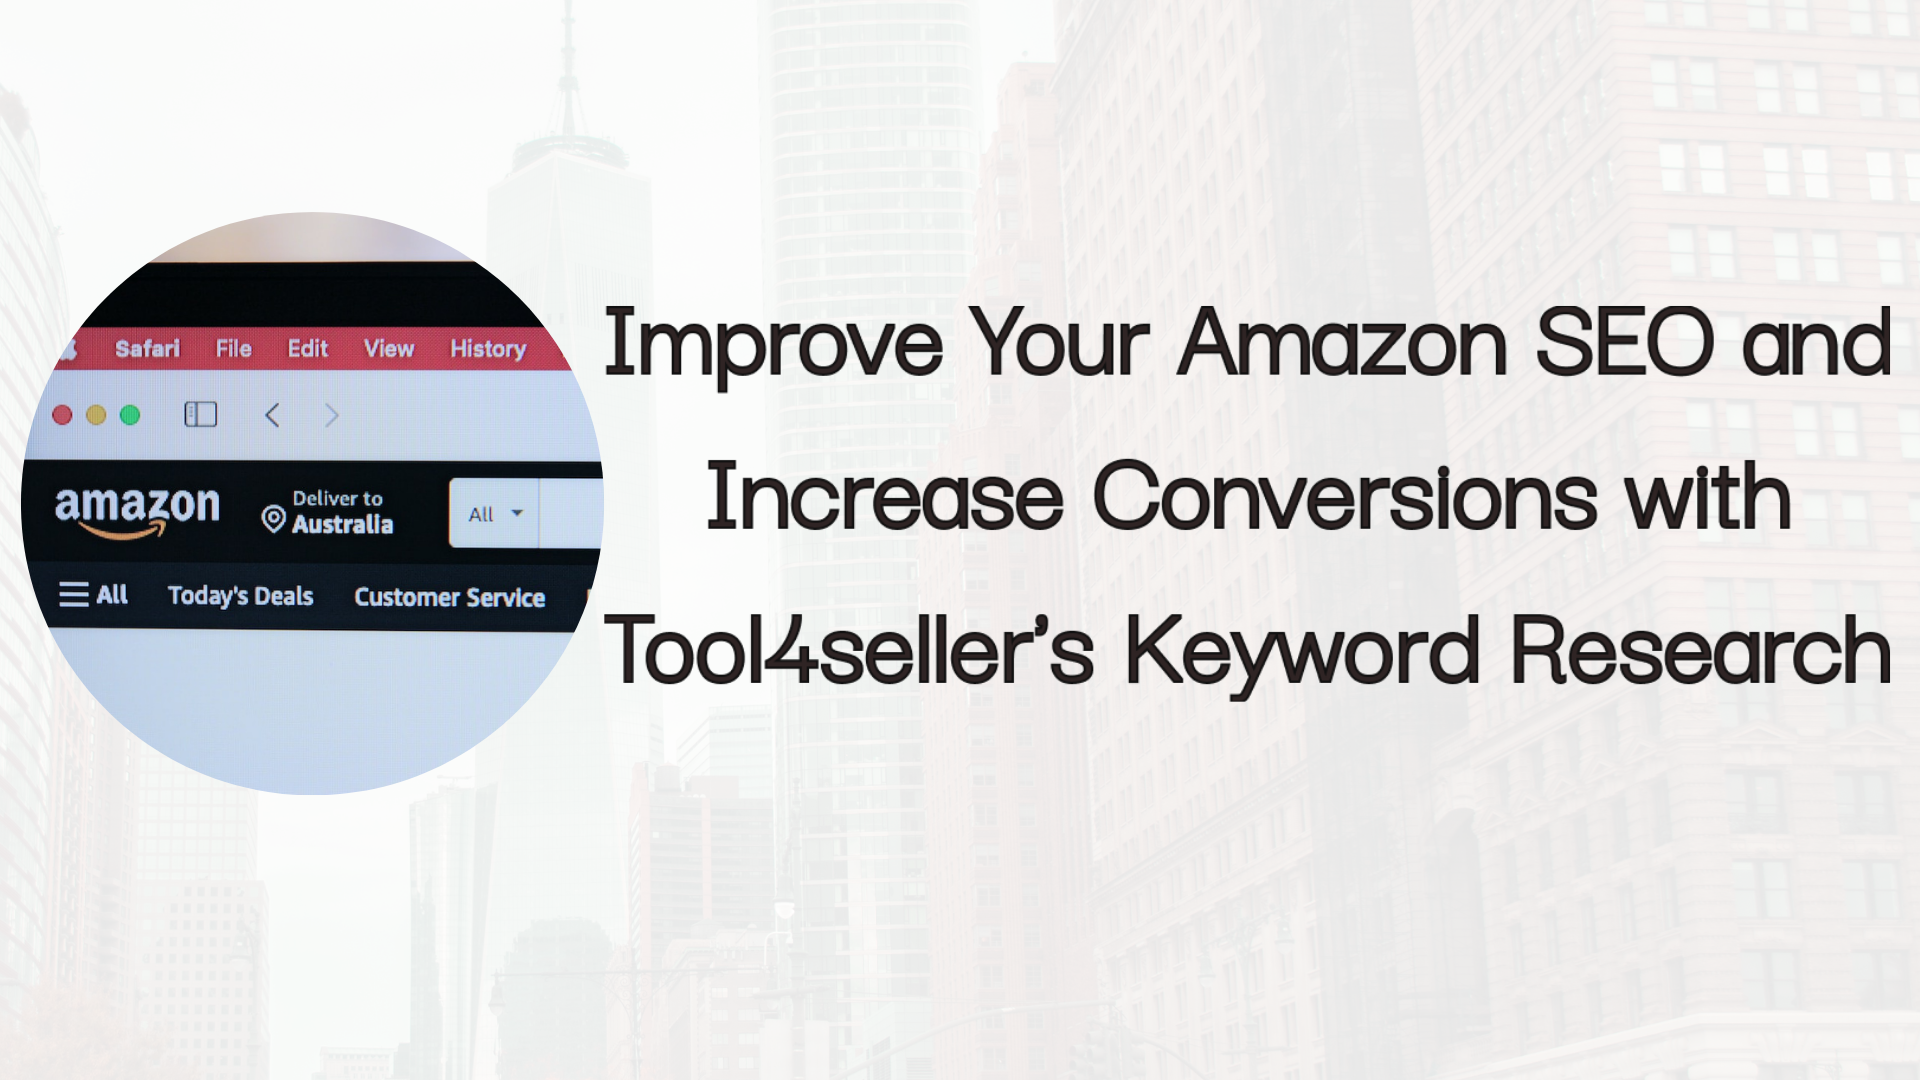 Improve Your Amazon SEO and Increase Conversions with Tool4seller’s Keyword Research